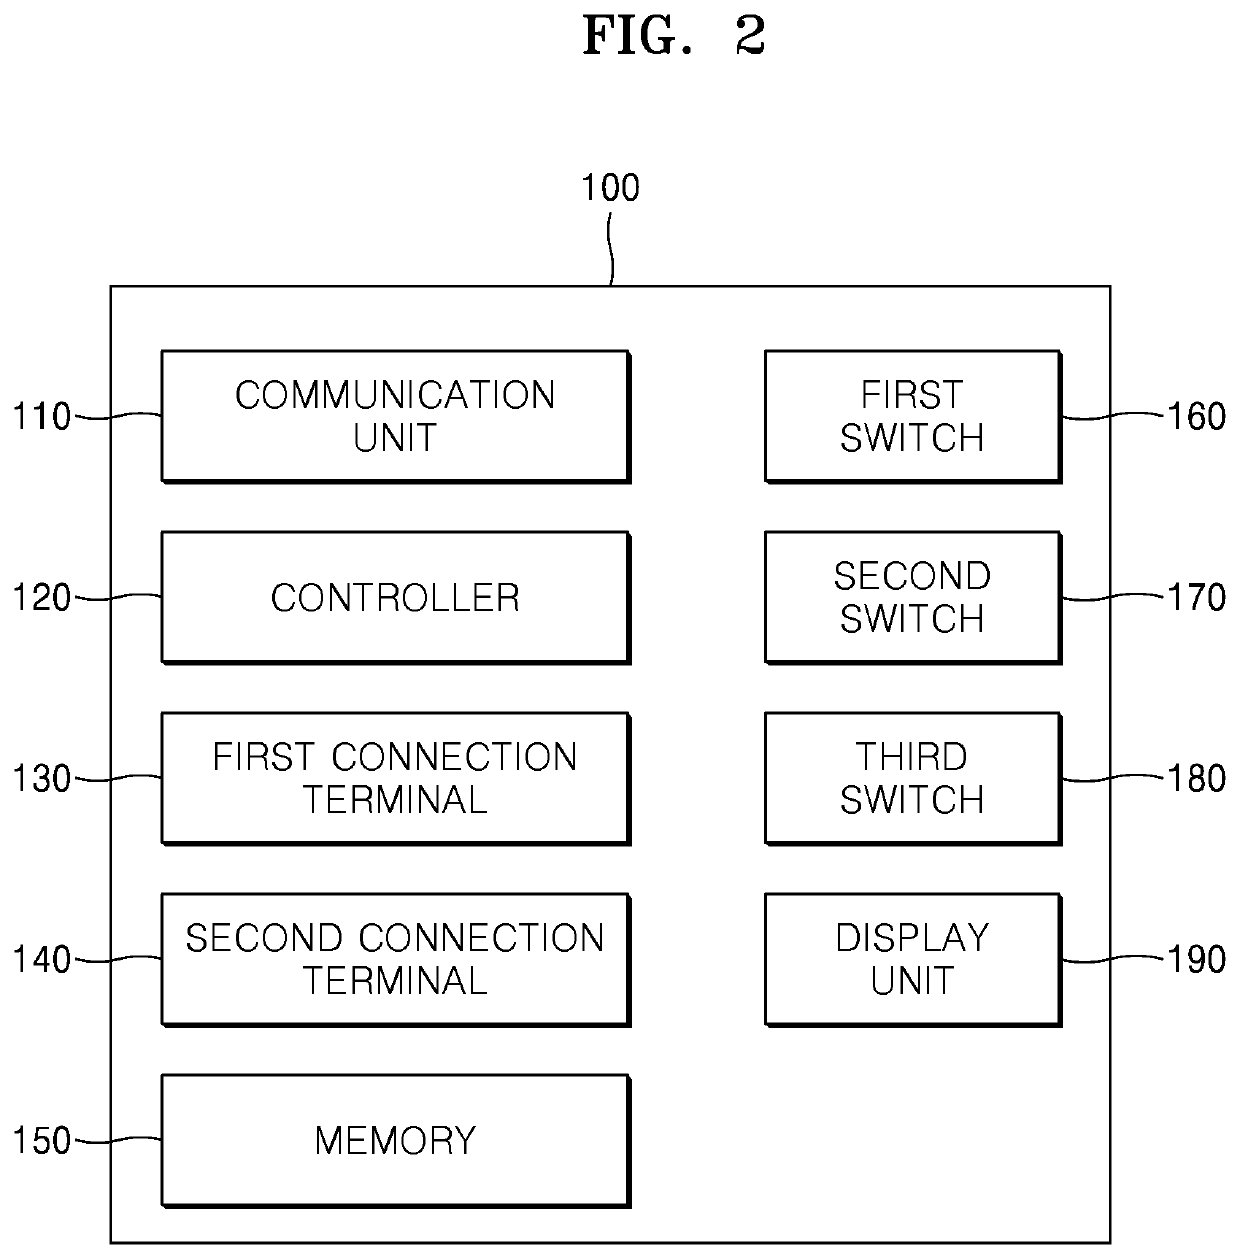 Device and method for diagnosing battery pack